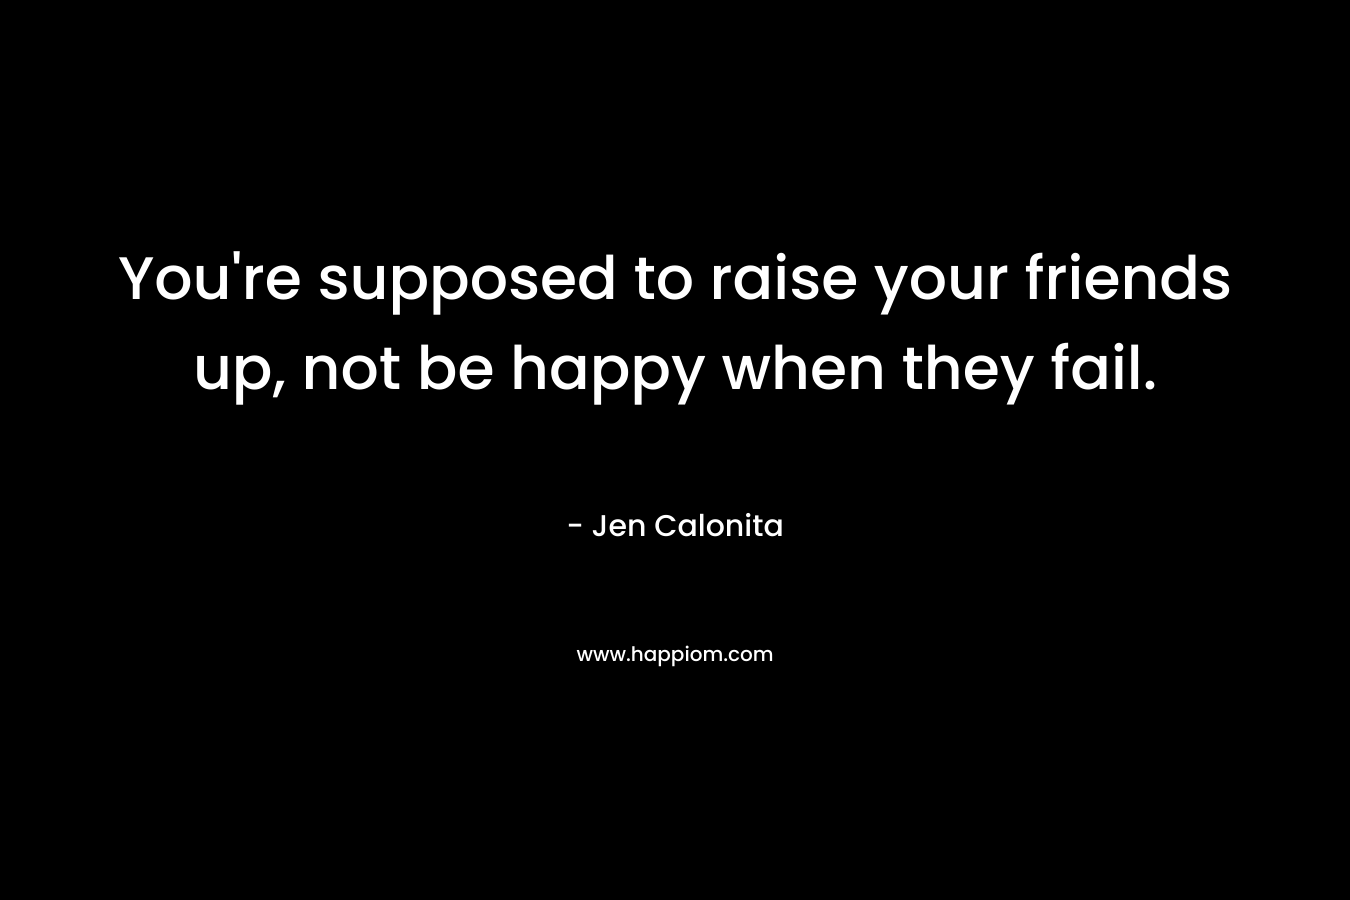 You're supposed to raise your friends up, not be happy when they fail.